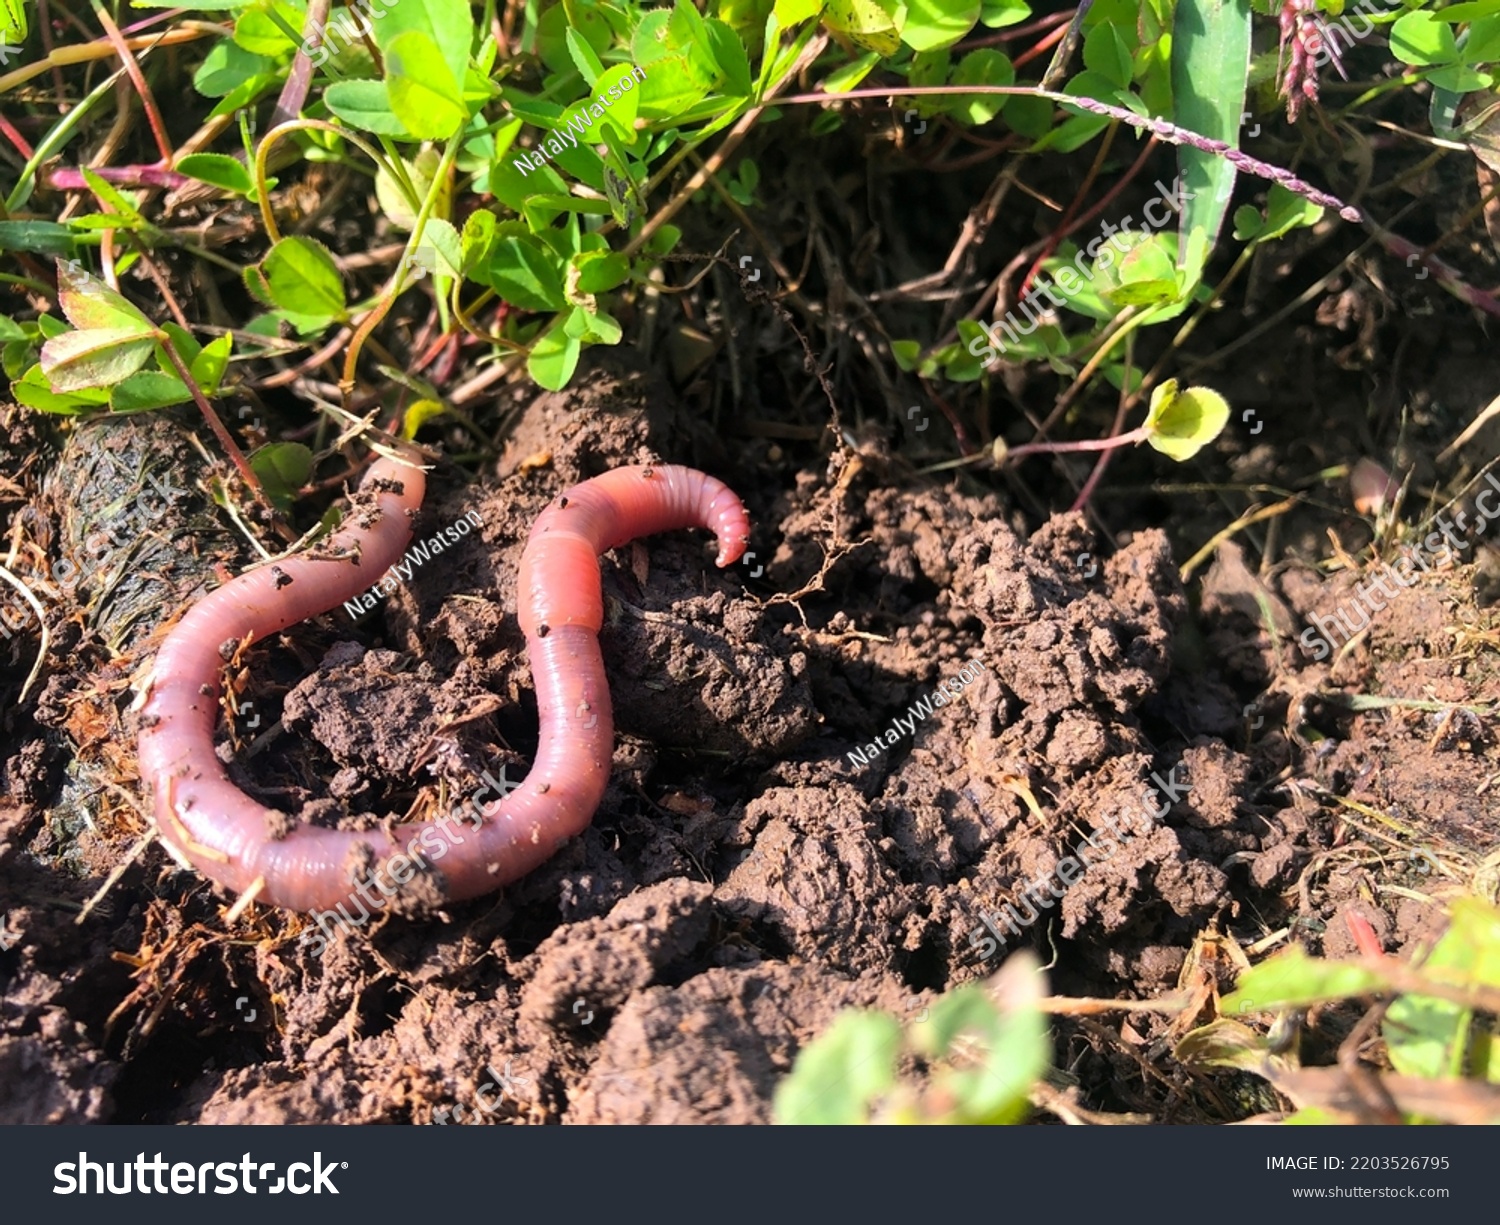 Earthworm in black soil. Garden compost and worms recycling plant waste into fertilizer and rich soil improver. #2203526795